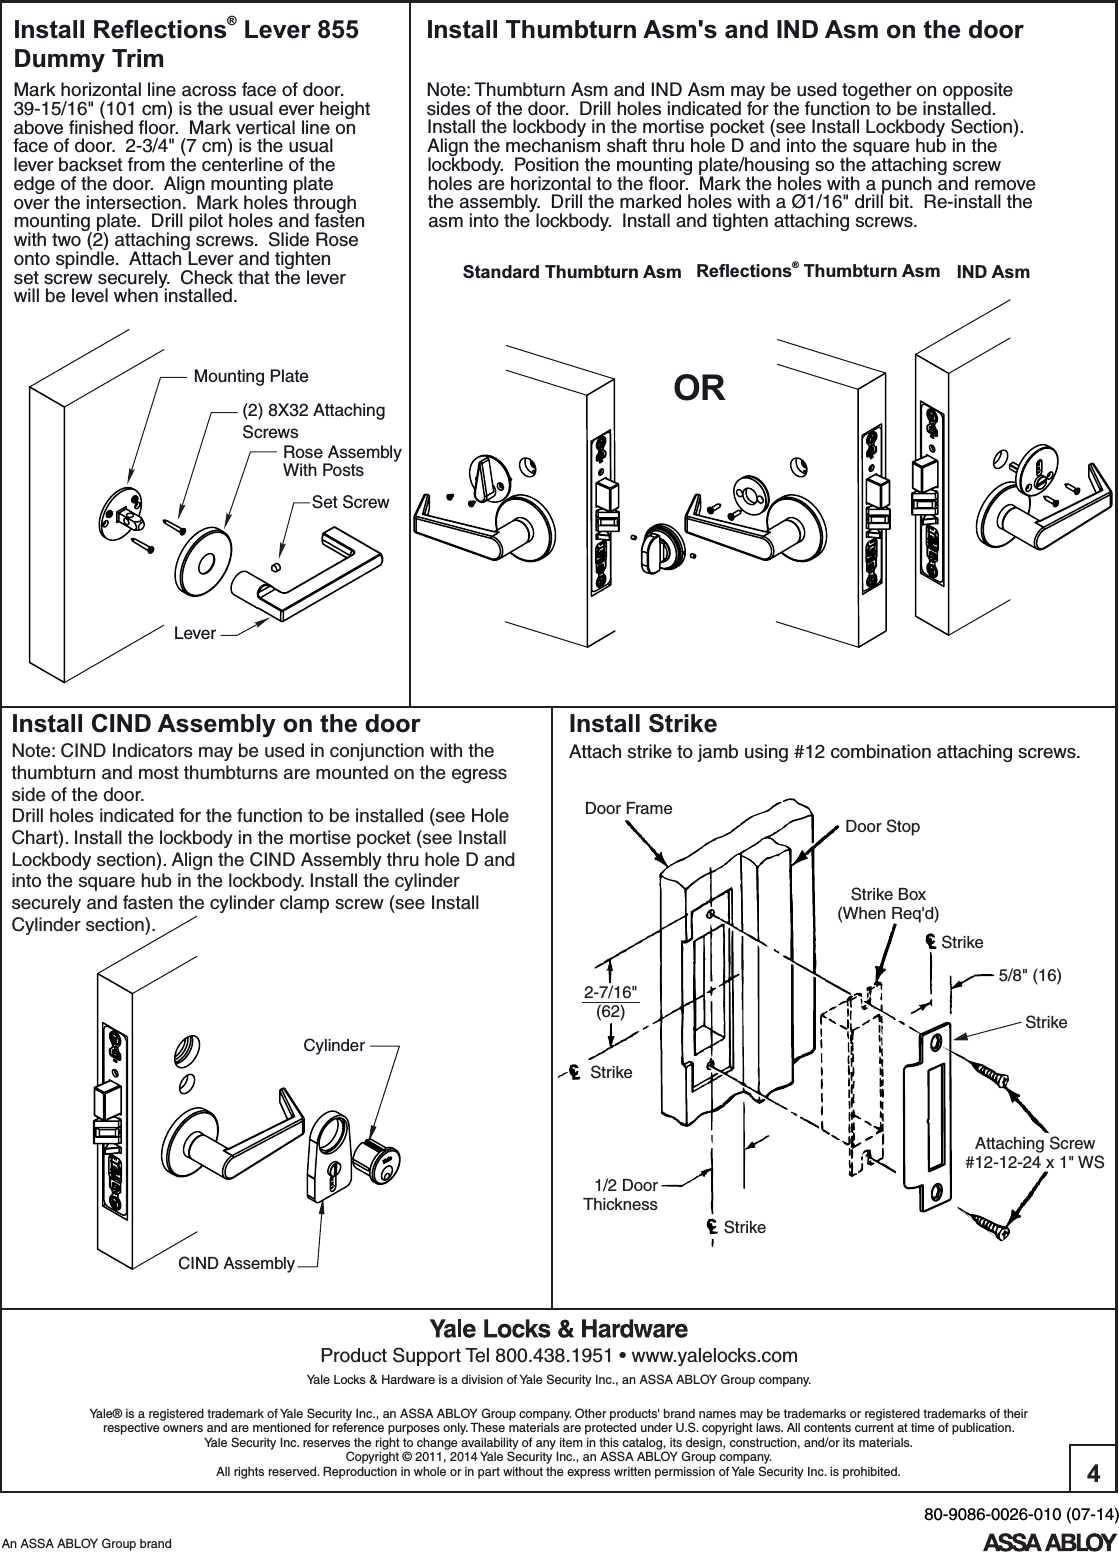 Page 4 of 8 - Yale  8800 Series Mortise Lock Installation Instructions 80-9086-0026-0108800Mortise